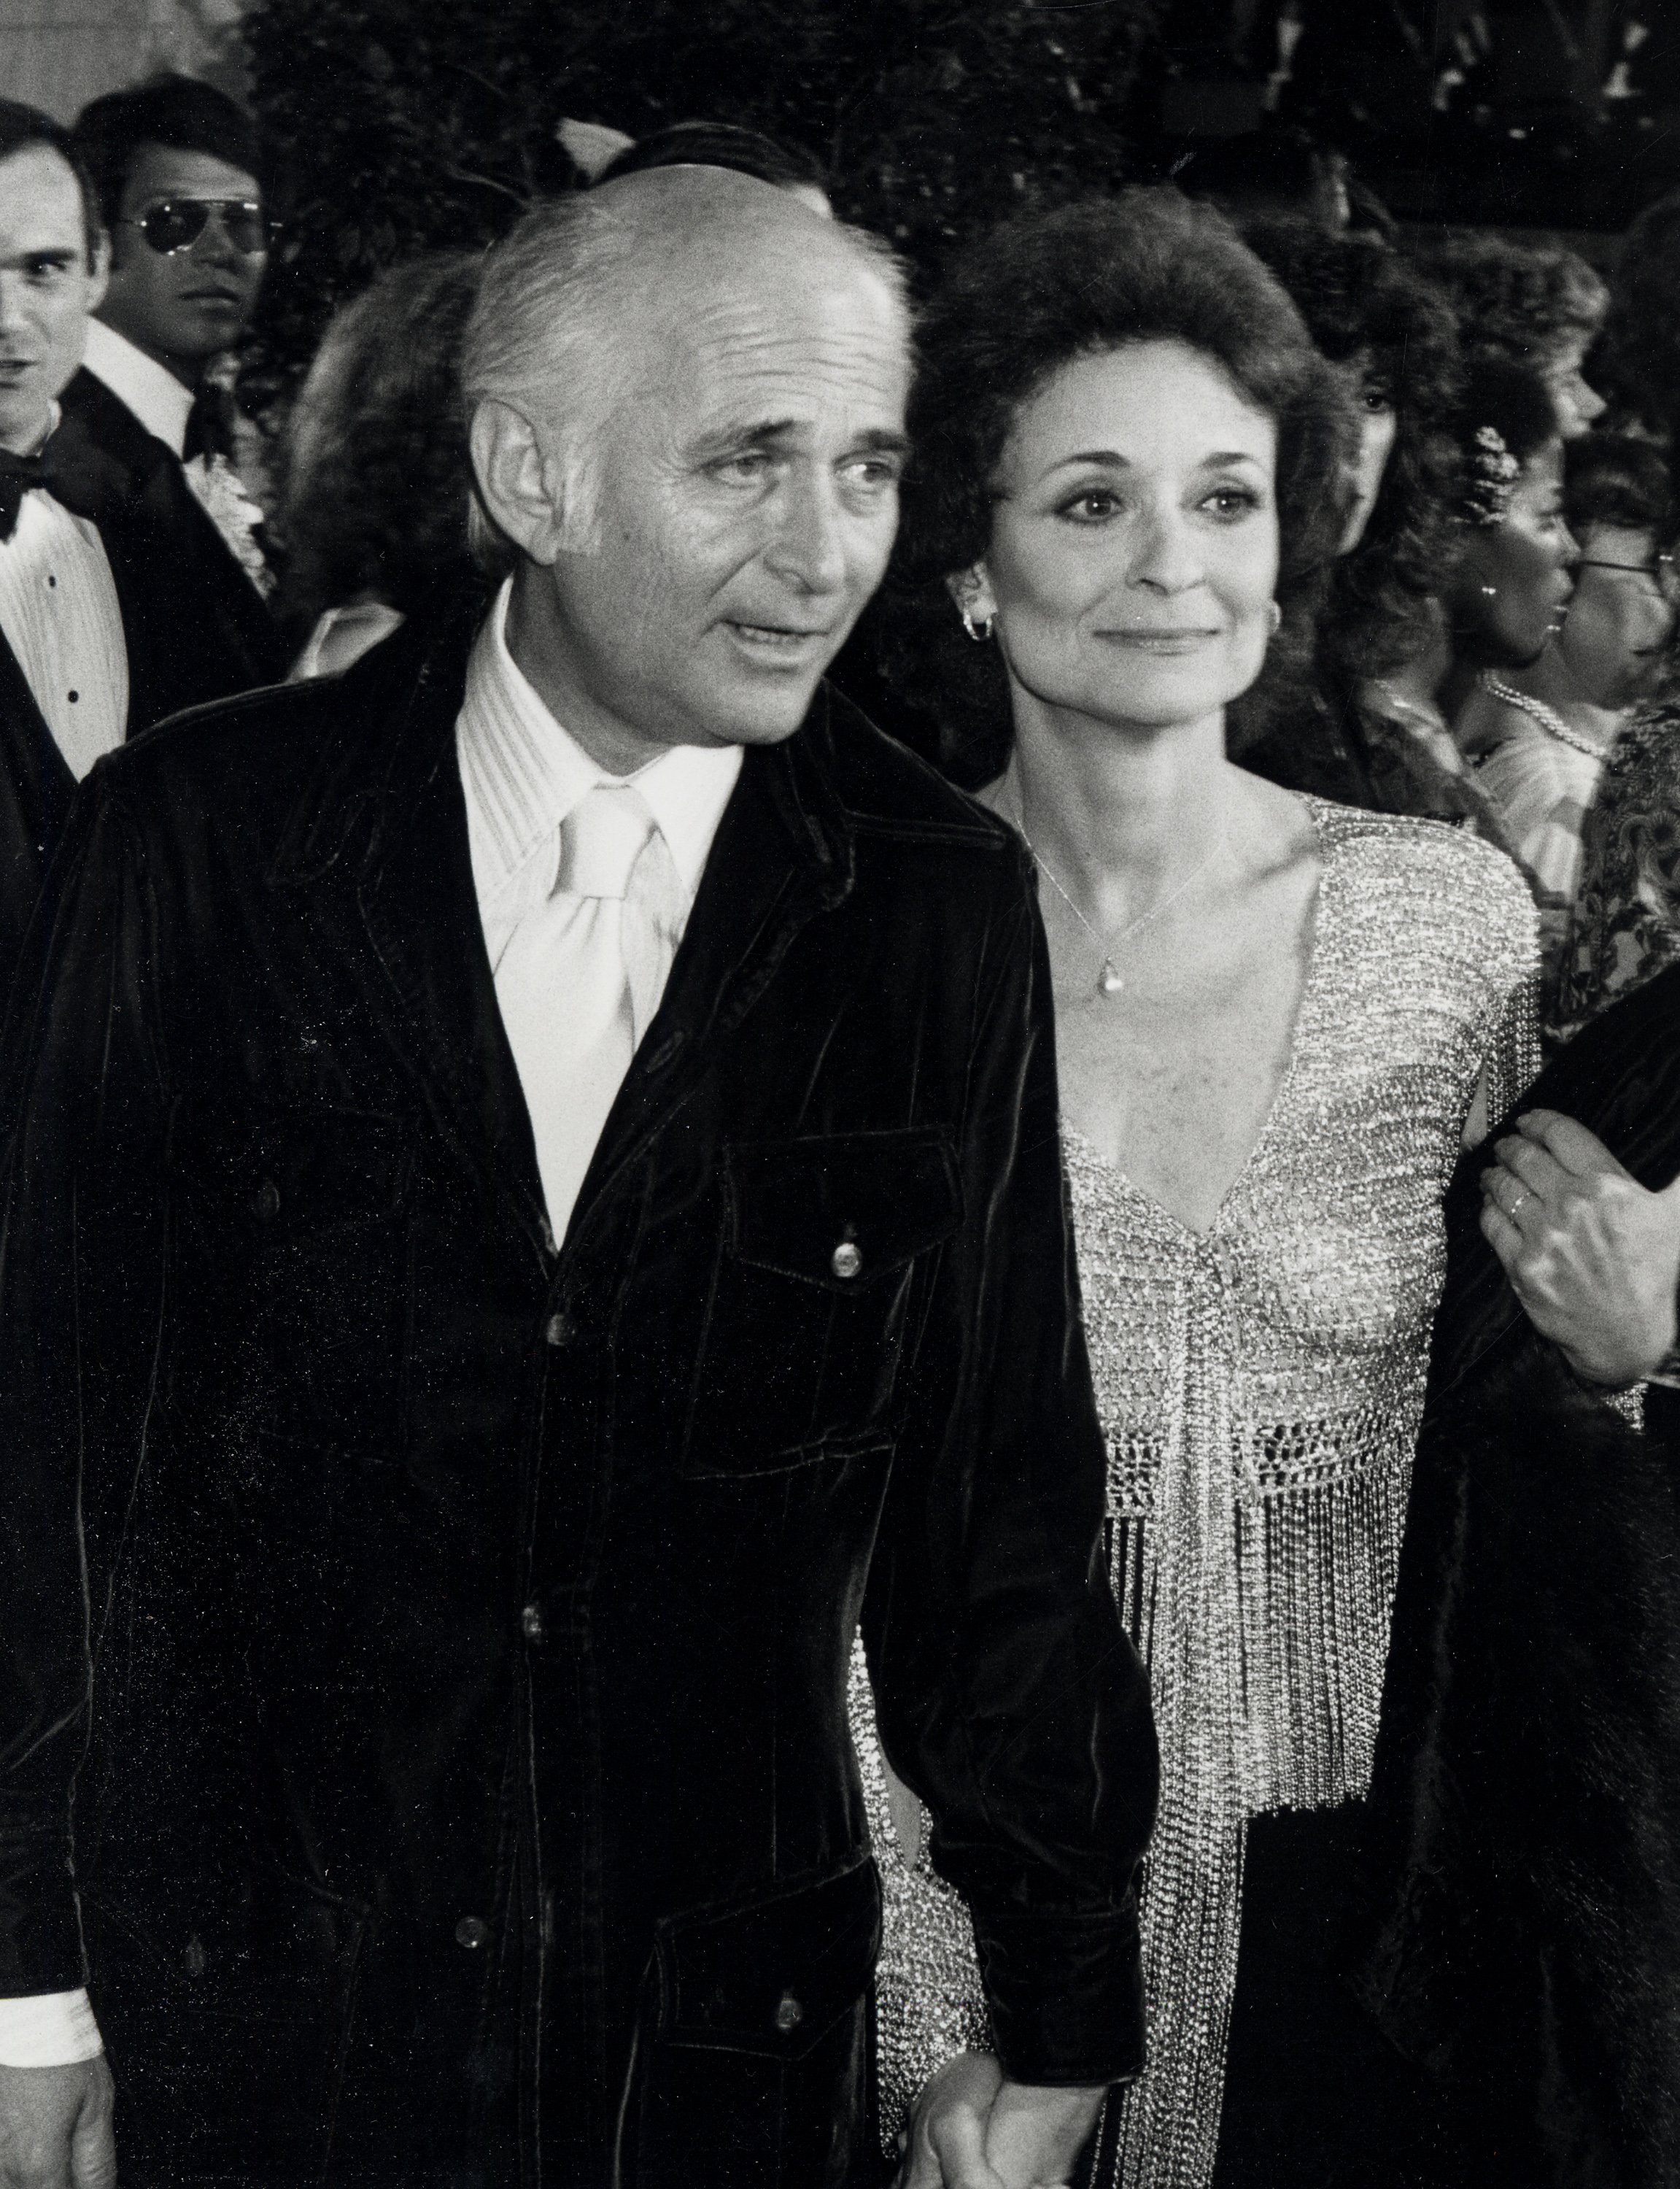 Producer Norman Lear and Frances Loeb attending the premiere of 'Hair' on March 14, 1979 at the ABC Center in Century City, California. | Source: Getty Images